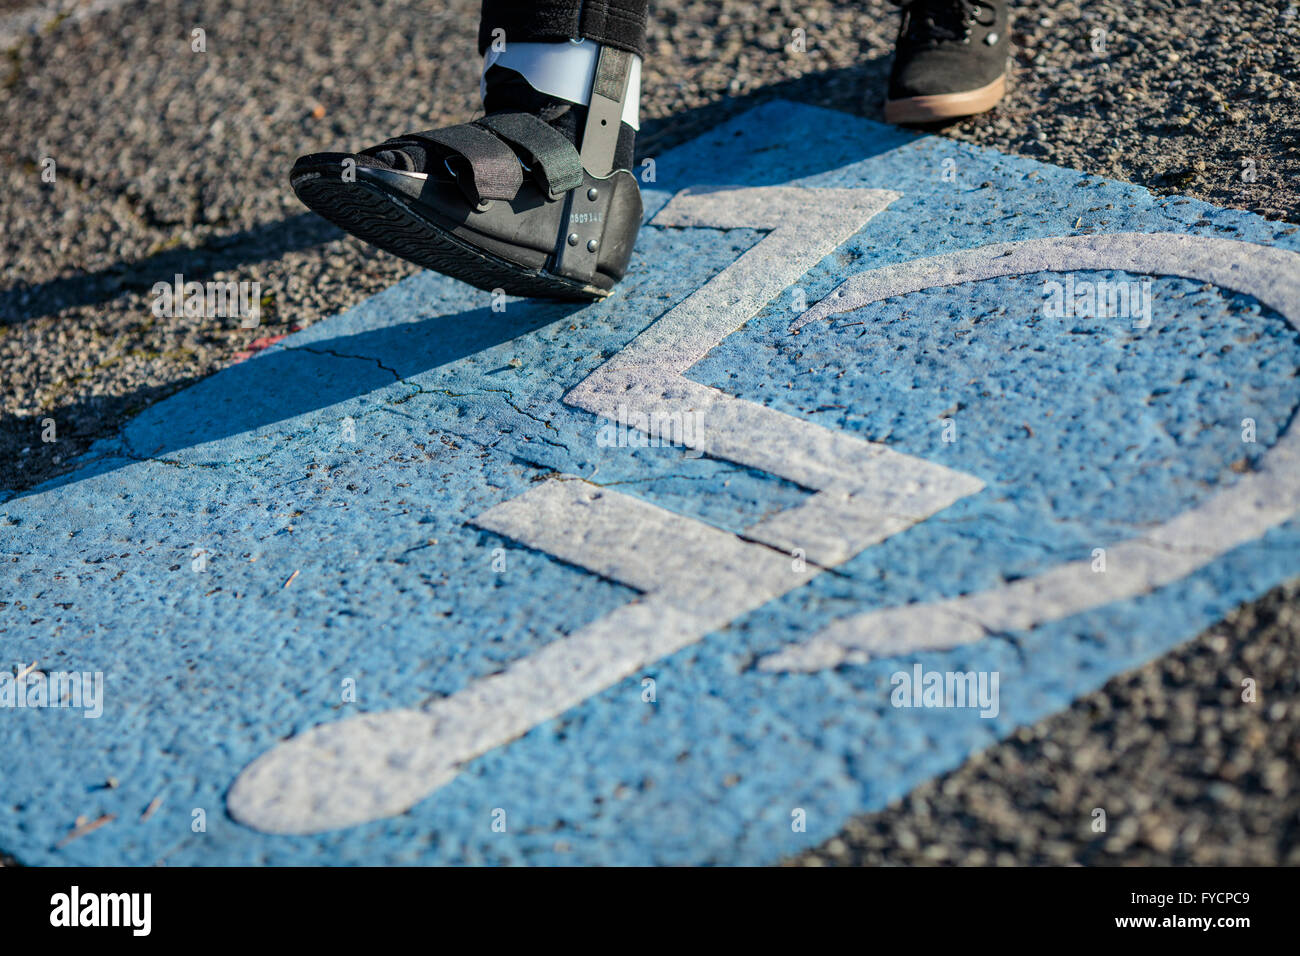 Person with a broken ankle boot steps into a handicapped symbol on a parking spot. Stock Photo